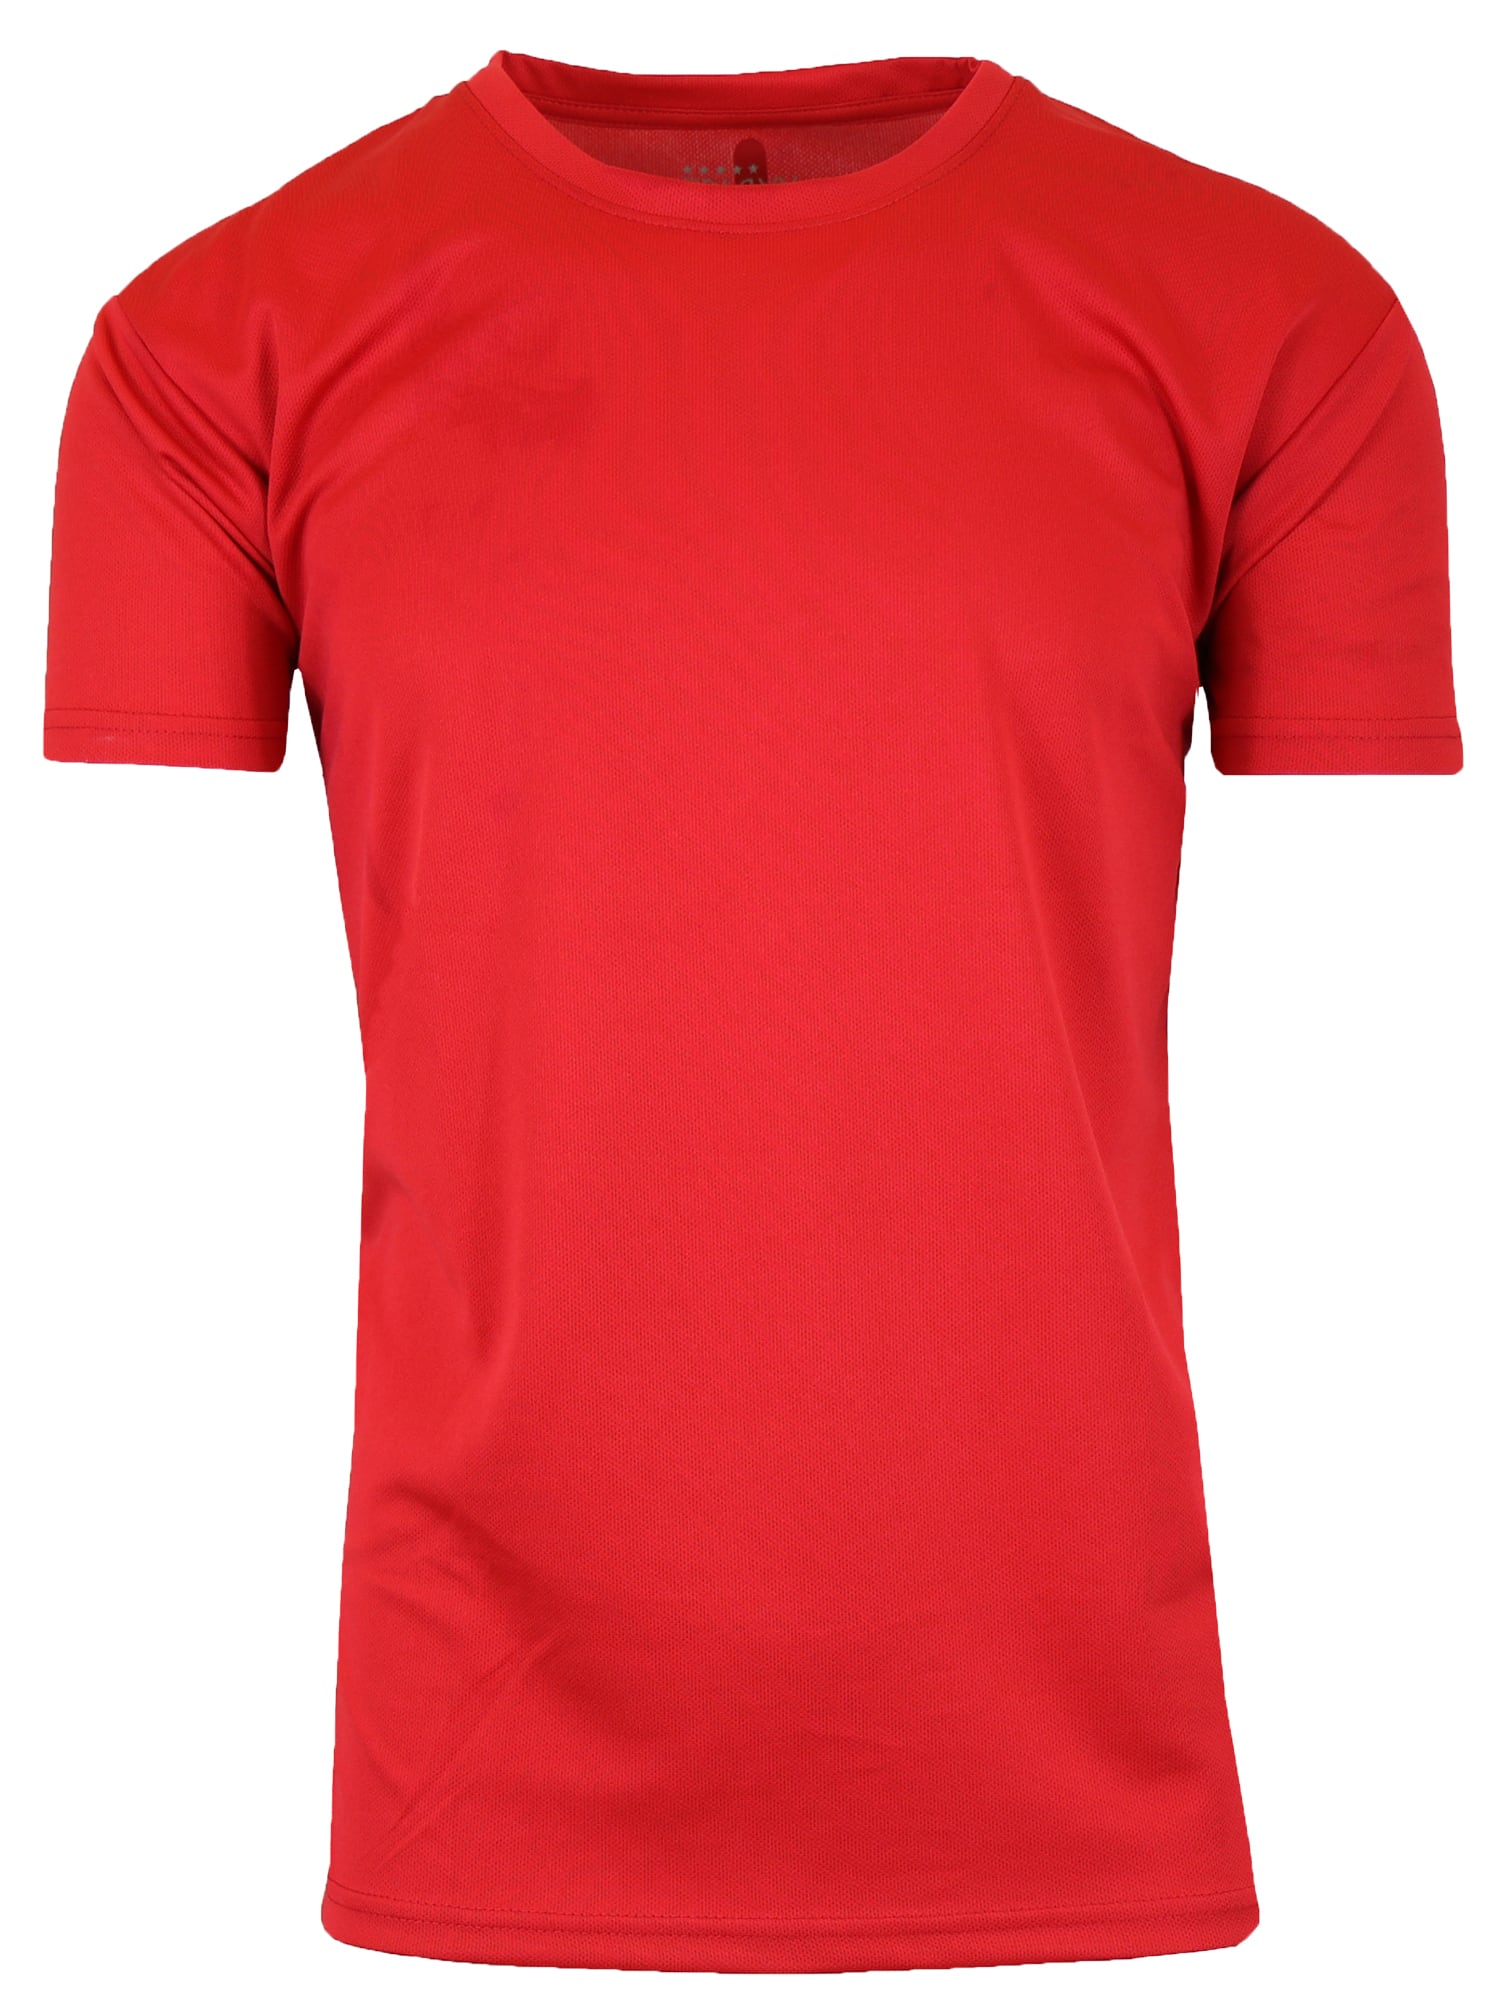 Galaxy by Harvic Moisture-Wicking Performance Men's T-Shirt